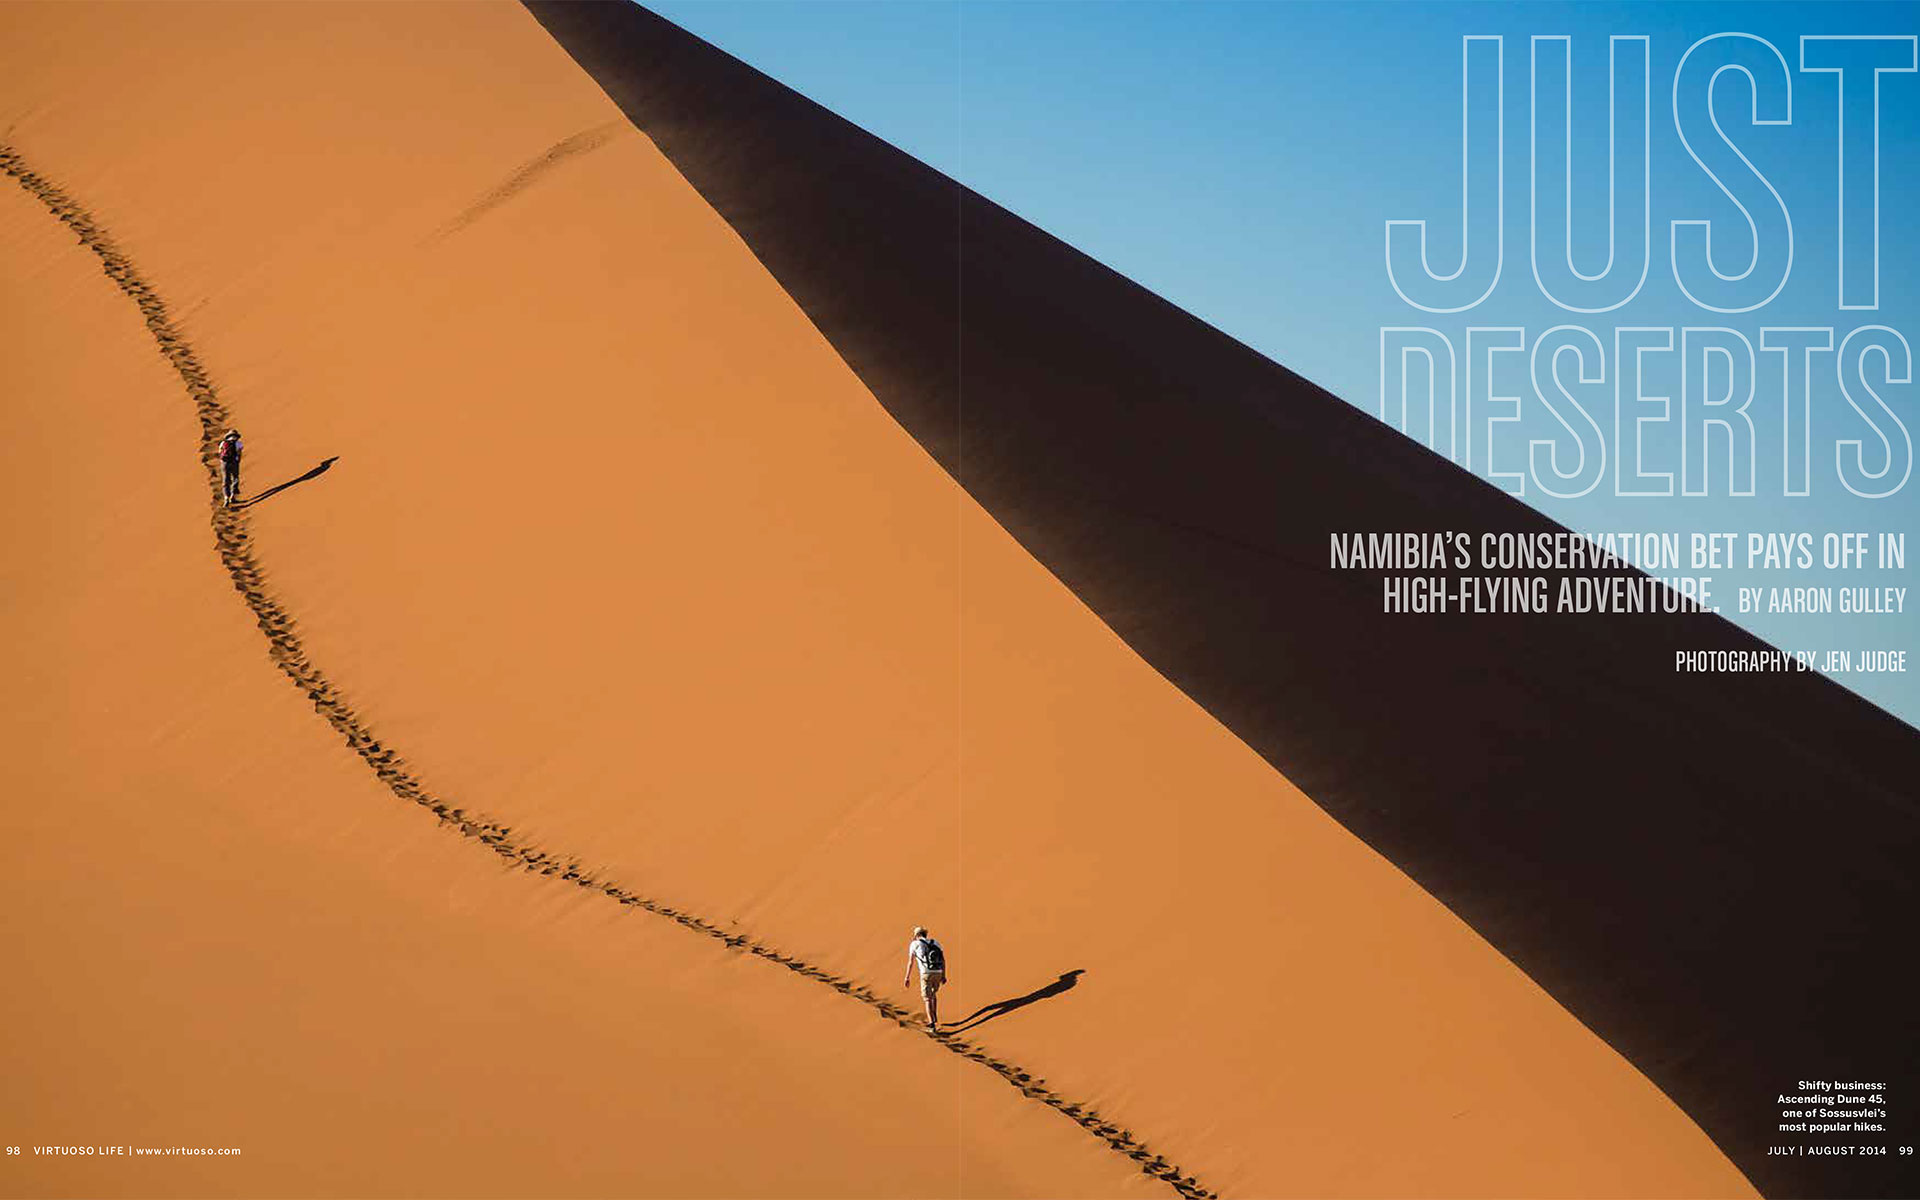 <p style="text-align: center;"><b><font color="2a2871">Just Deserts, Virtuoso Life, July 2014</font></b>
</p>
Namibia's conservation bet pays off in high-flying adventure.
<p style="text-align: center;"><a href="/users/AaronGulley18670/VL_Namib_7-14.pdf" onclick="window.open(this.href, '', 'resizable=no,status=no,location=no,toolbar=no,menubar=no,fullscreen=no,scrollbars=no,dependent=no,width=900'); return false;">Read the Story</a></p>
